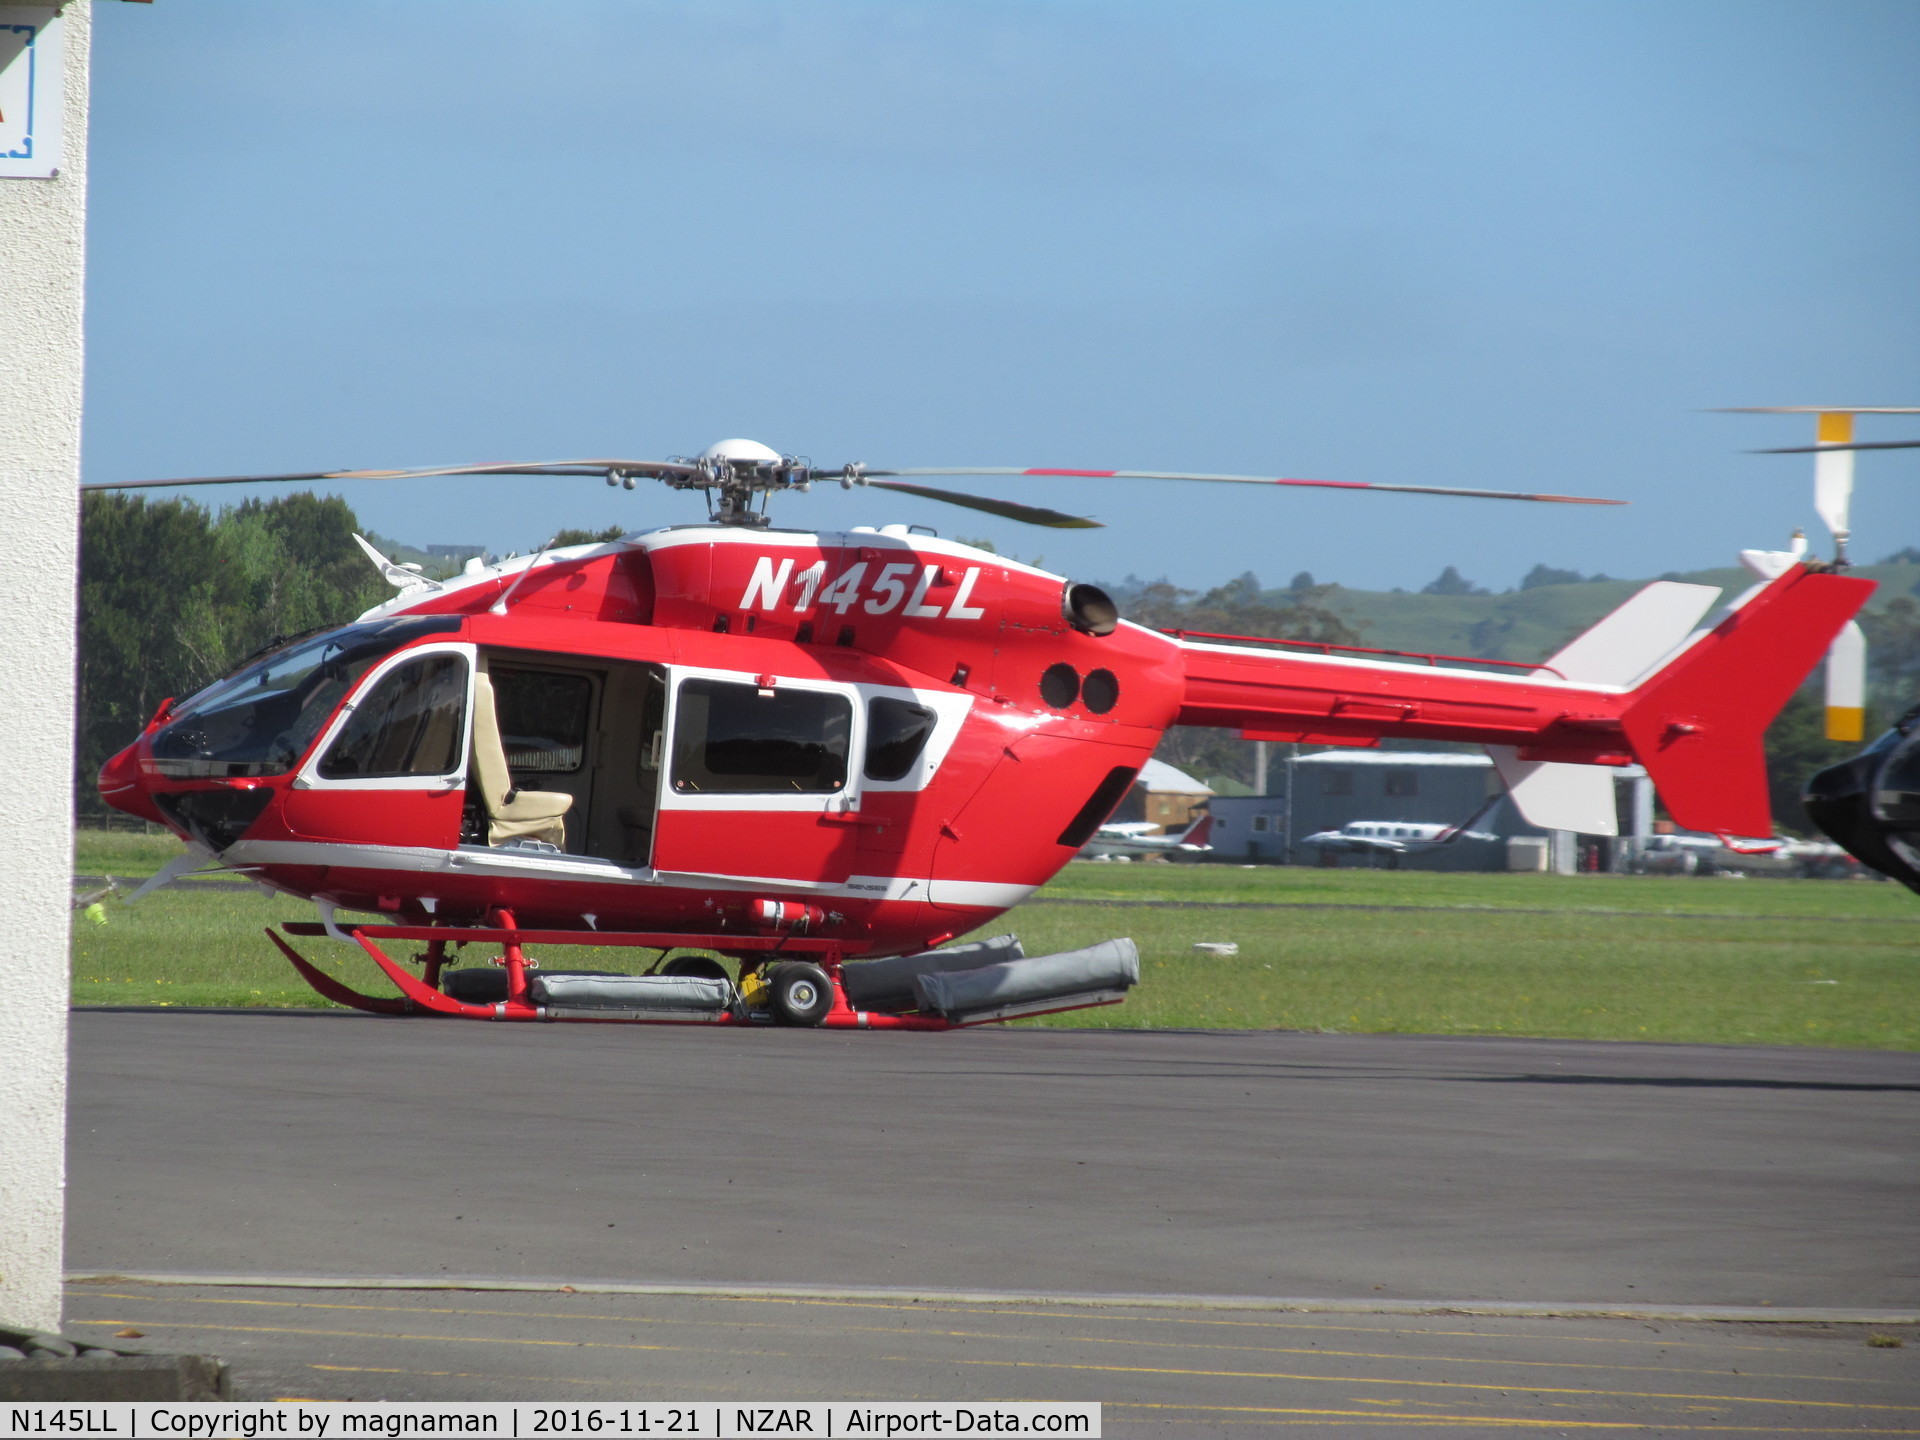 N145LL, Eurocopter-Kawasaki EC-145 (BK-117C-2) C/N 9574, at Ardmore for attention - off super yacht in harbour